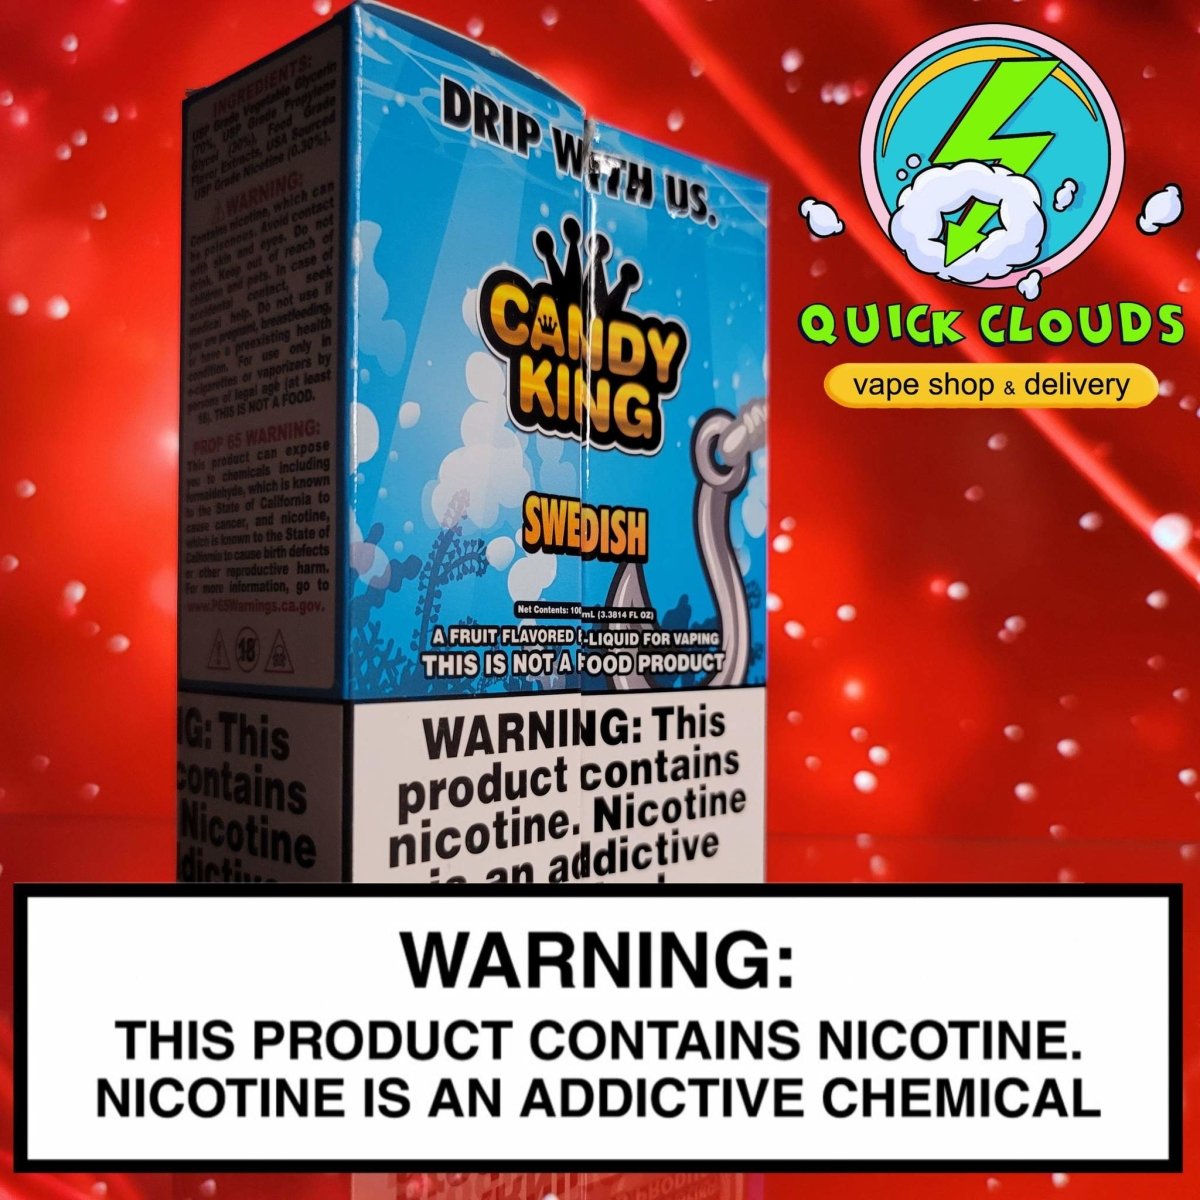 Candy King juices are Buy 2 Get 1 FREE! | Quick Clouds Vape Shop and Delivery